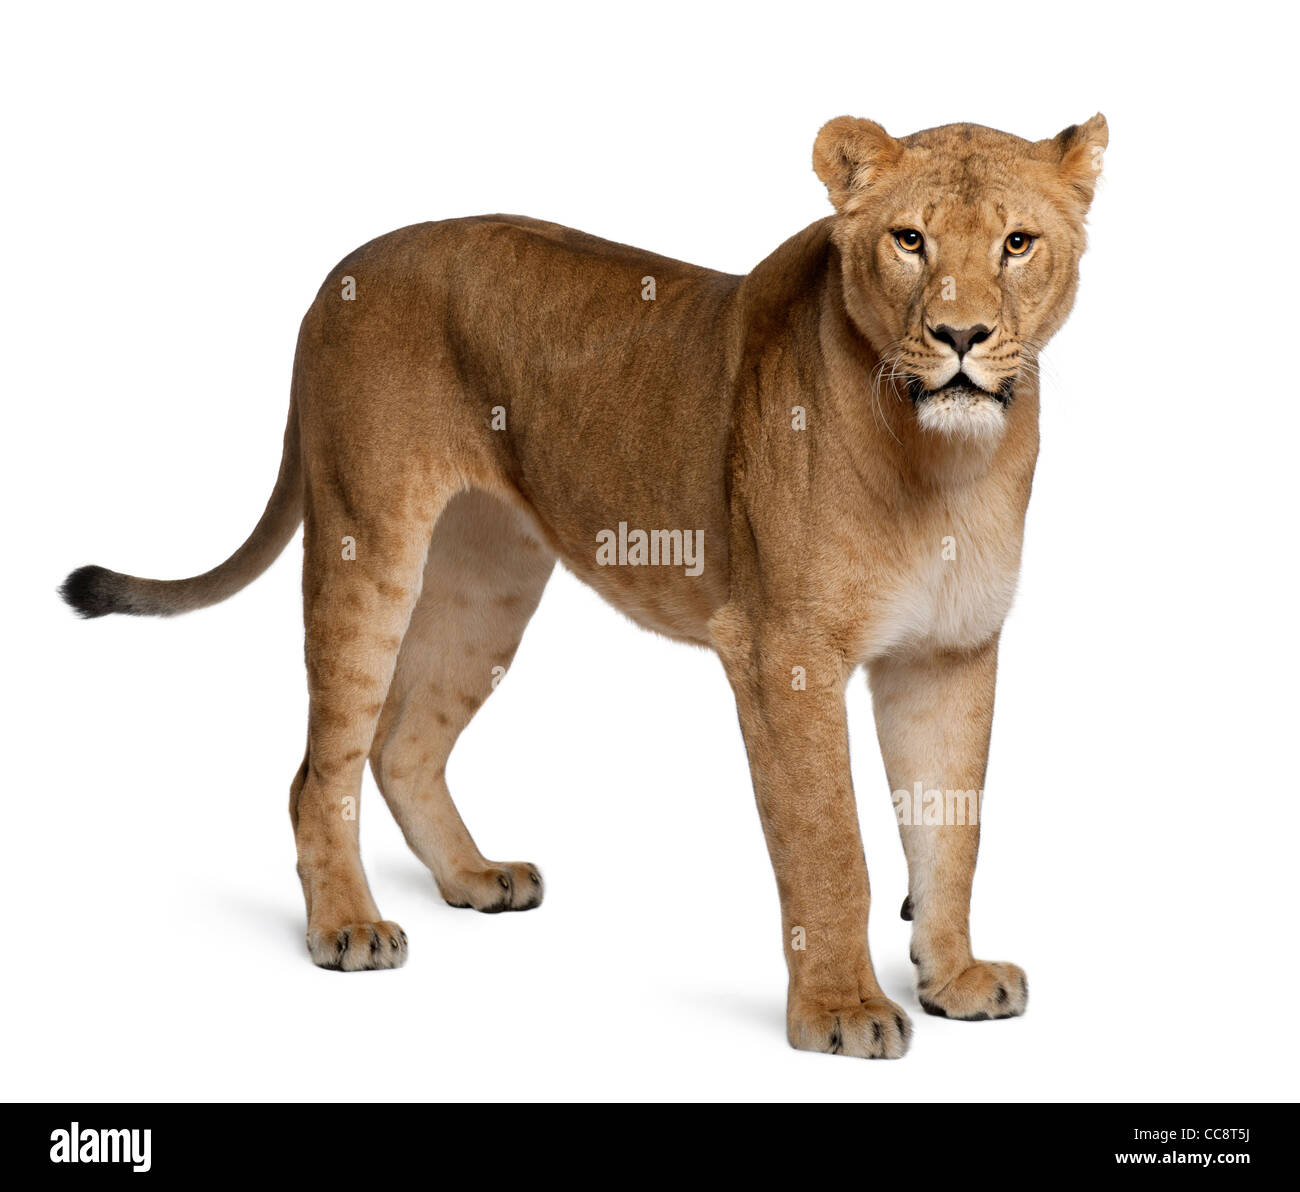 Lioness, Panthera leo, 3 years old, standing against white background Stock Photo